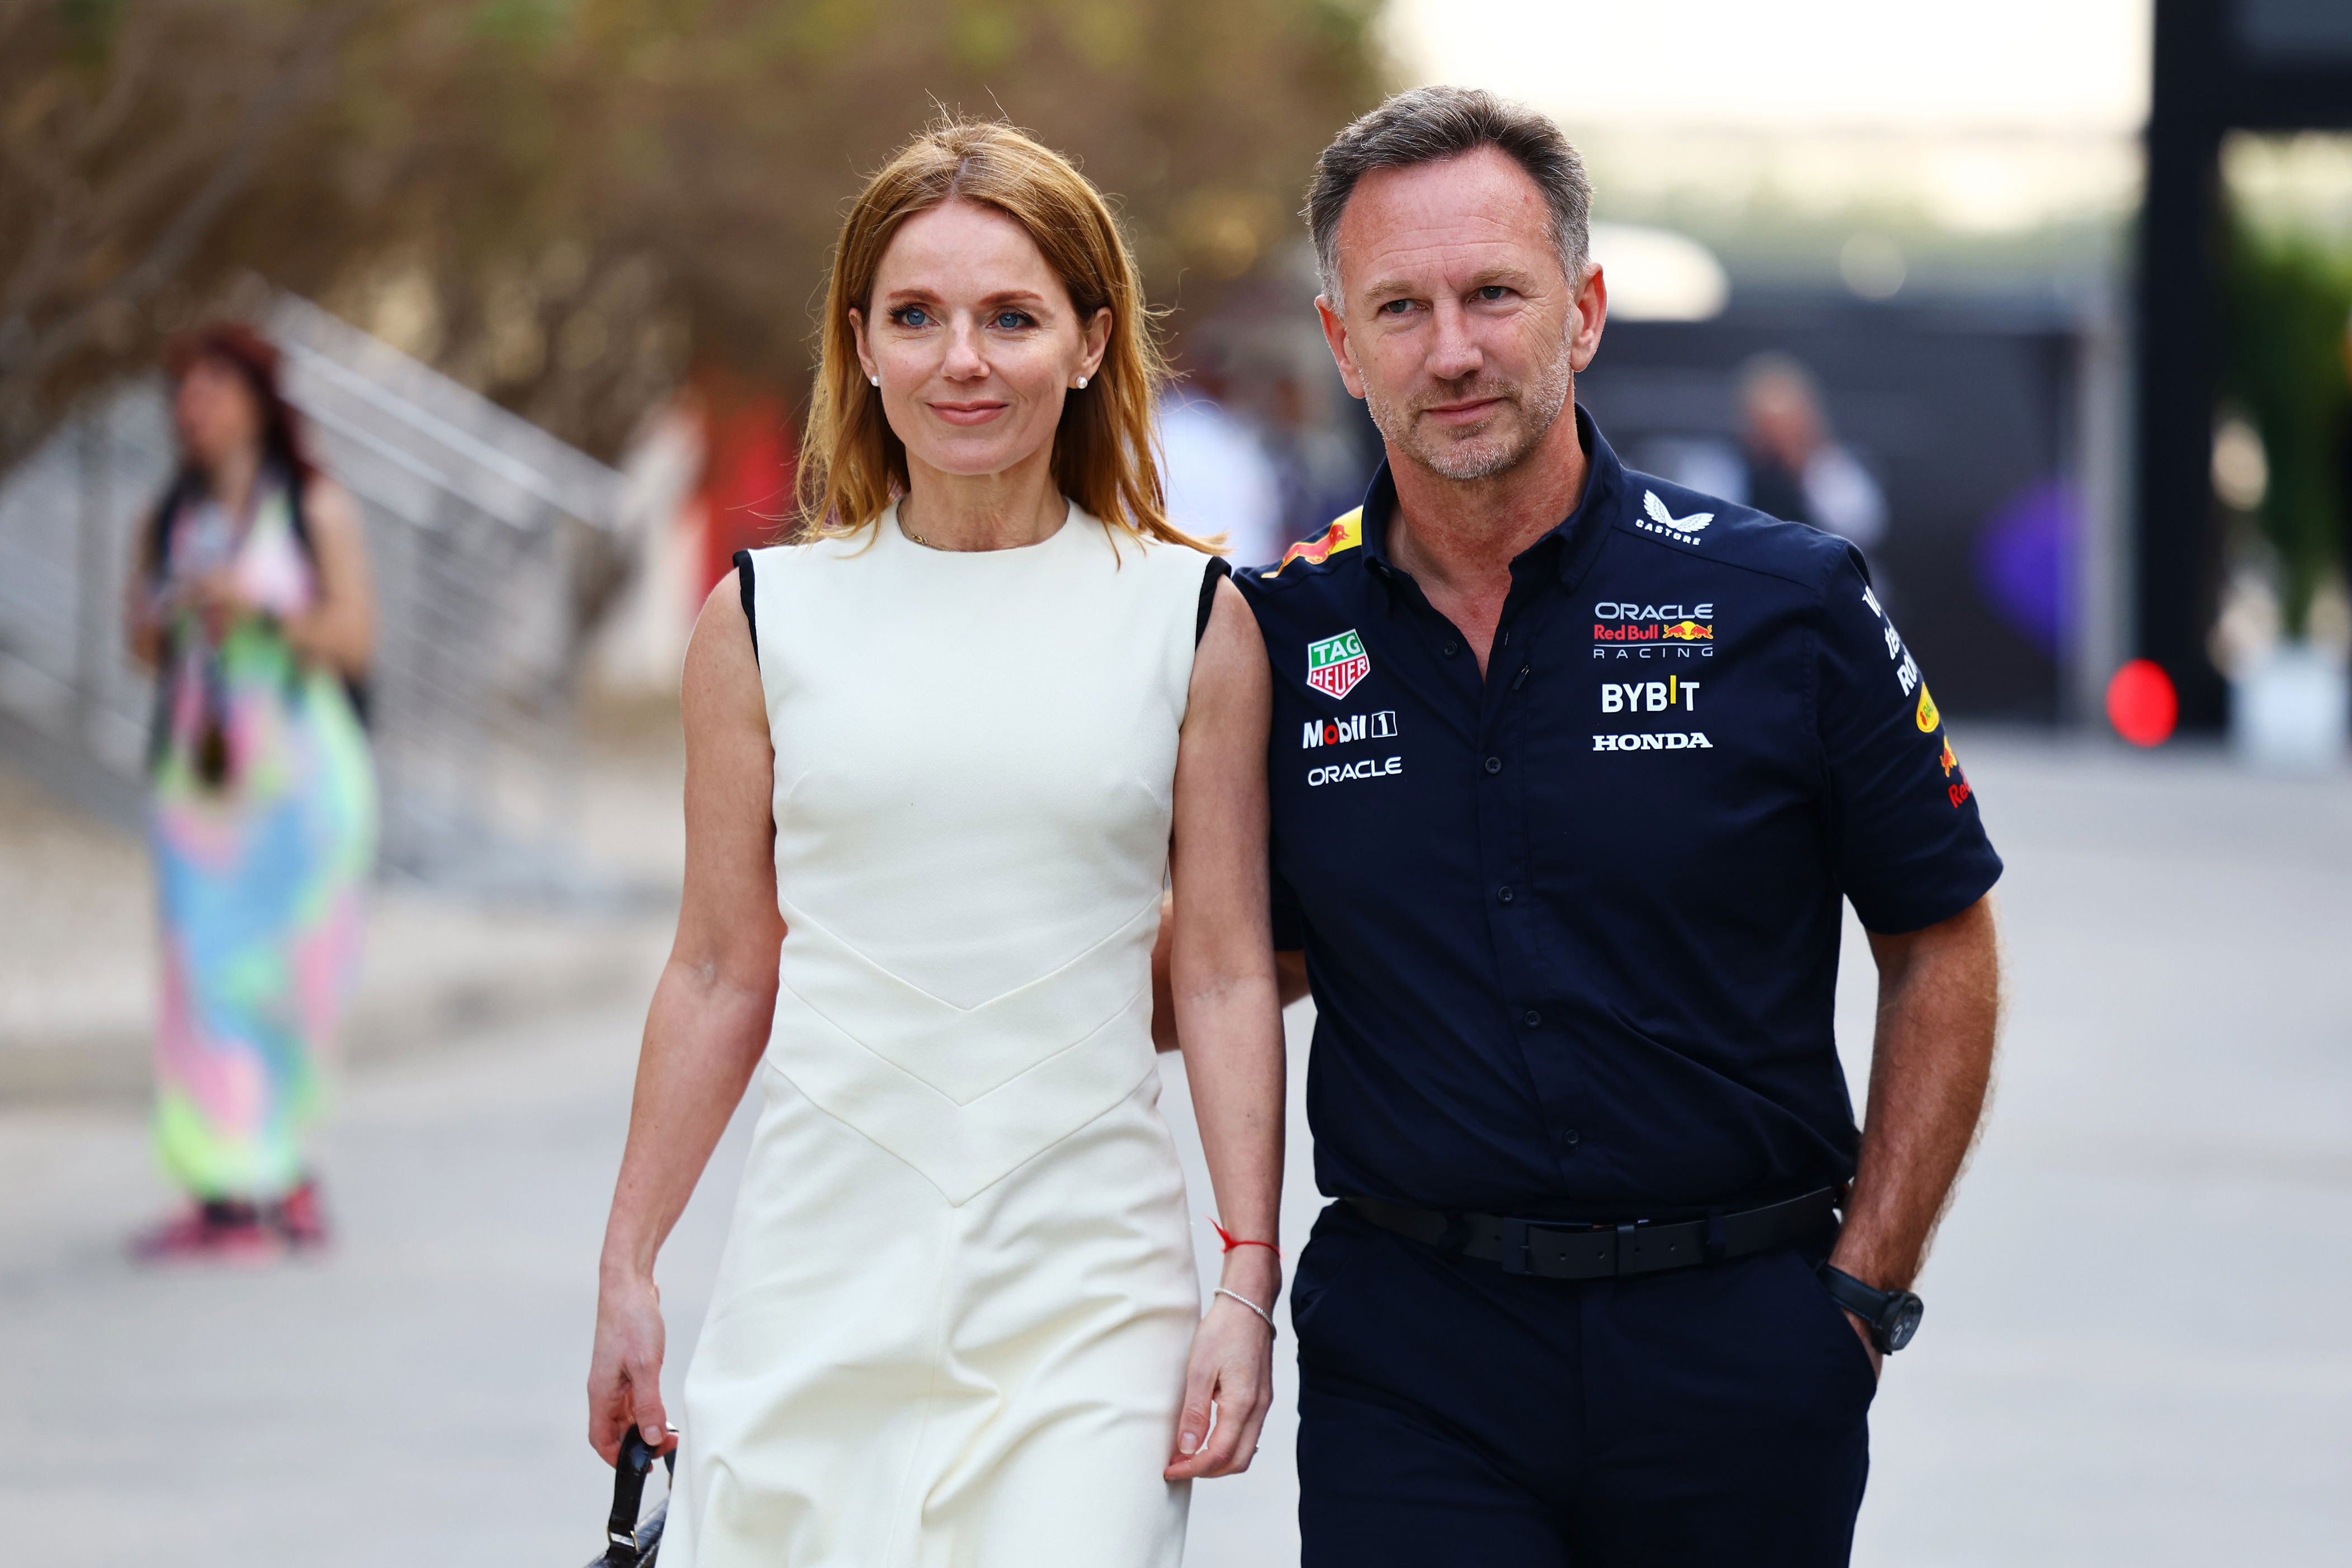 christian horner’s accuser targets red bull return to work as she awaits appeal outcome